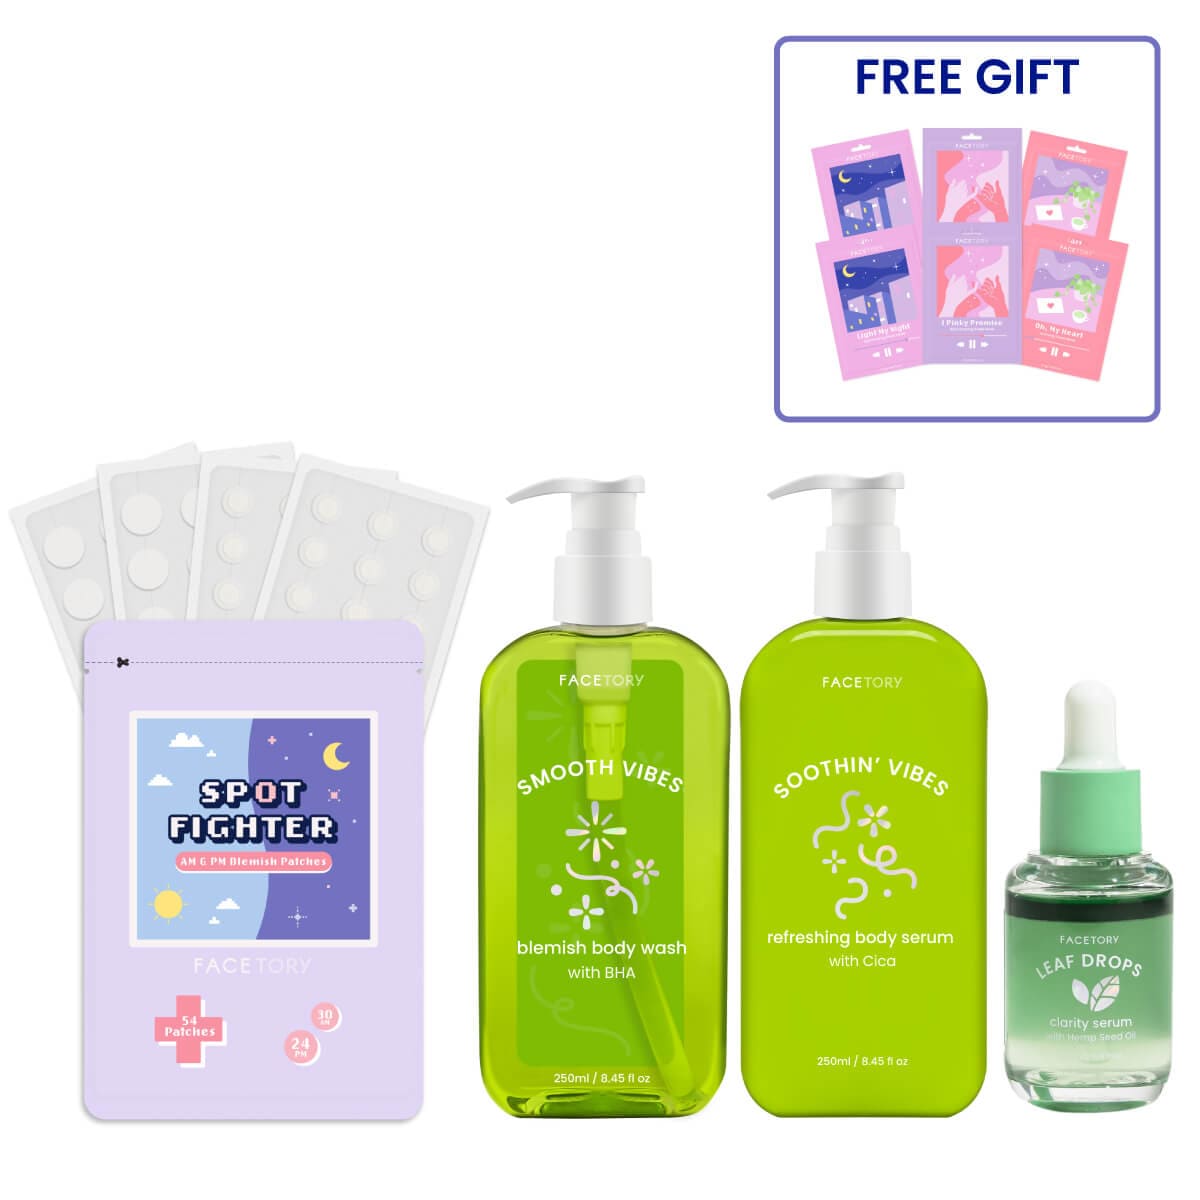 FaceTory Acne Treatment Set: Save 30% OFF + Get a FREE Gift